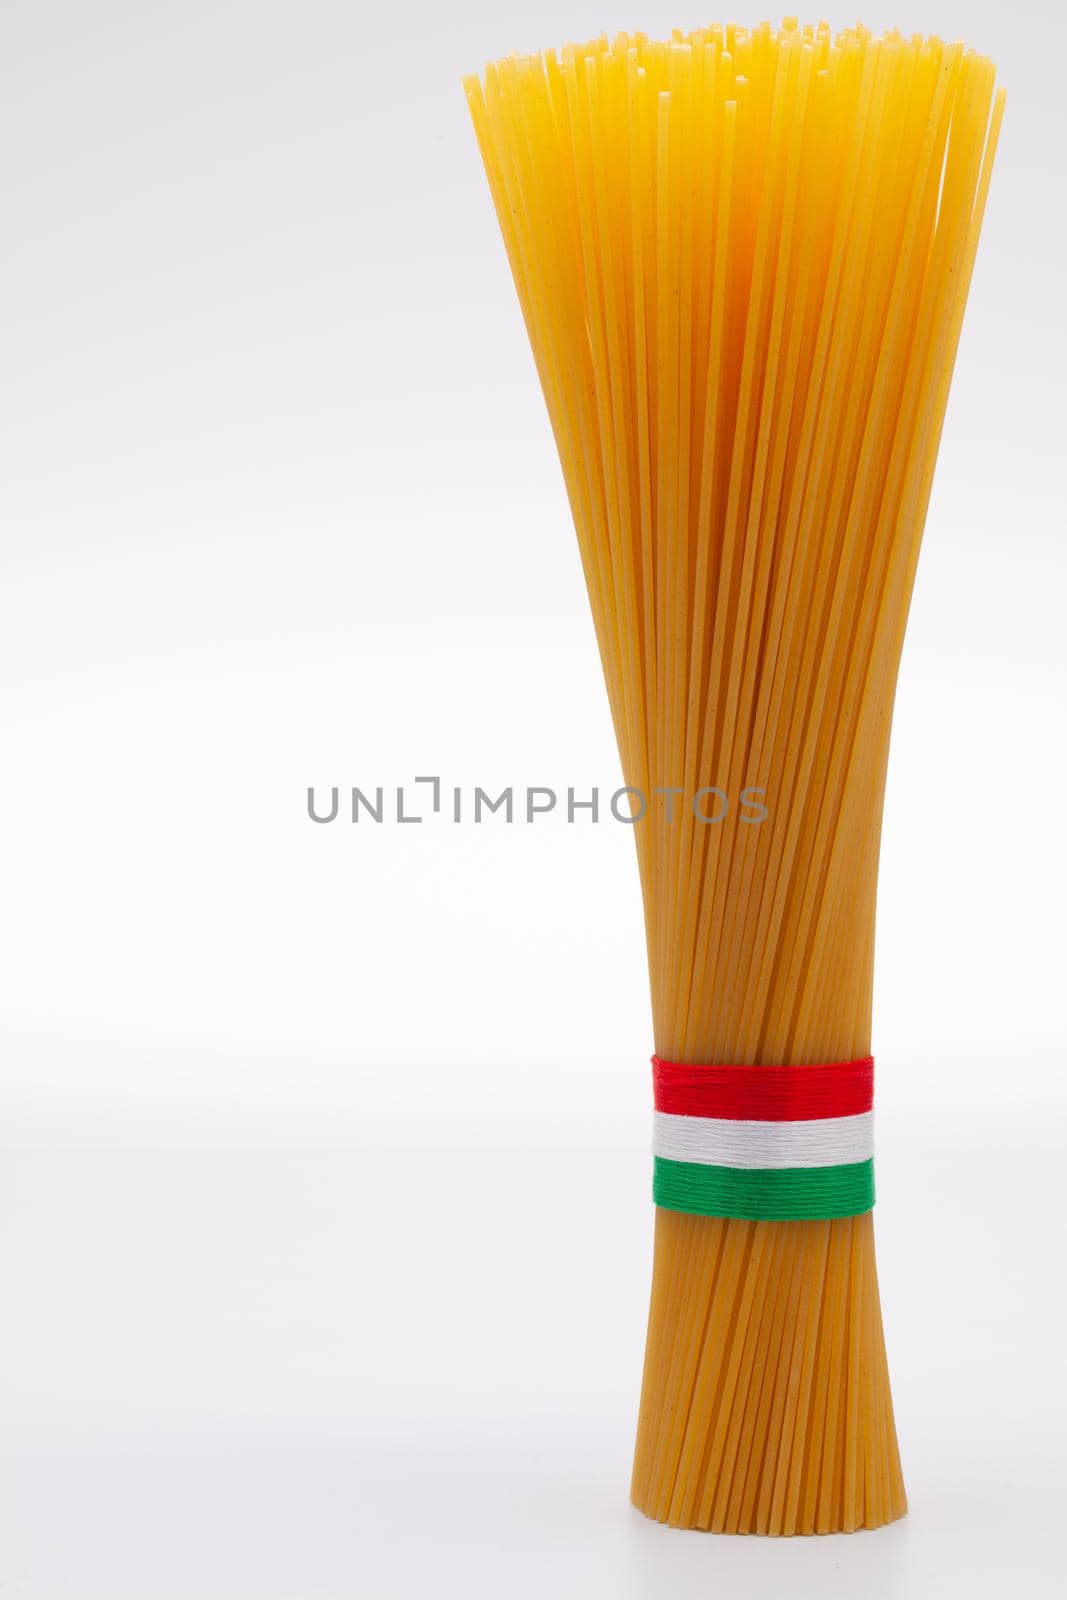 Bundle of spaghetti and Italian flag on the white table by CaptureLight